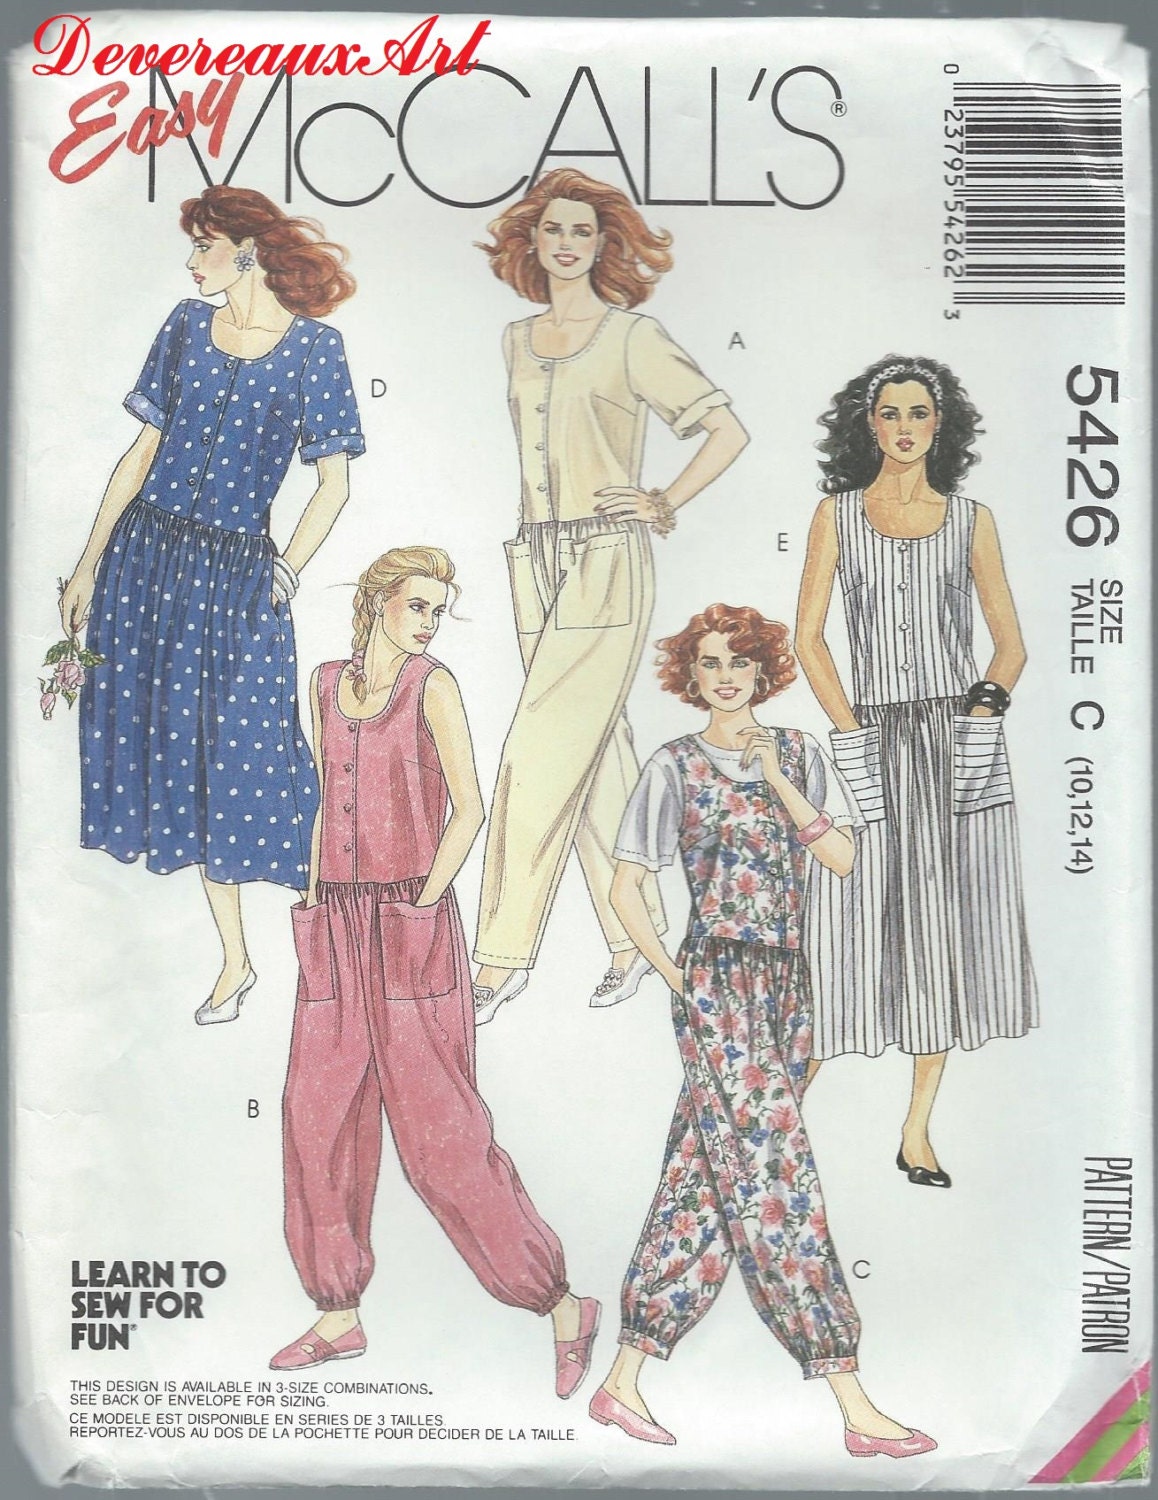 1991 McCall's Learn-to sew-for-fun Pattern 5426 by Devereauxart